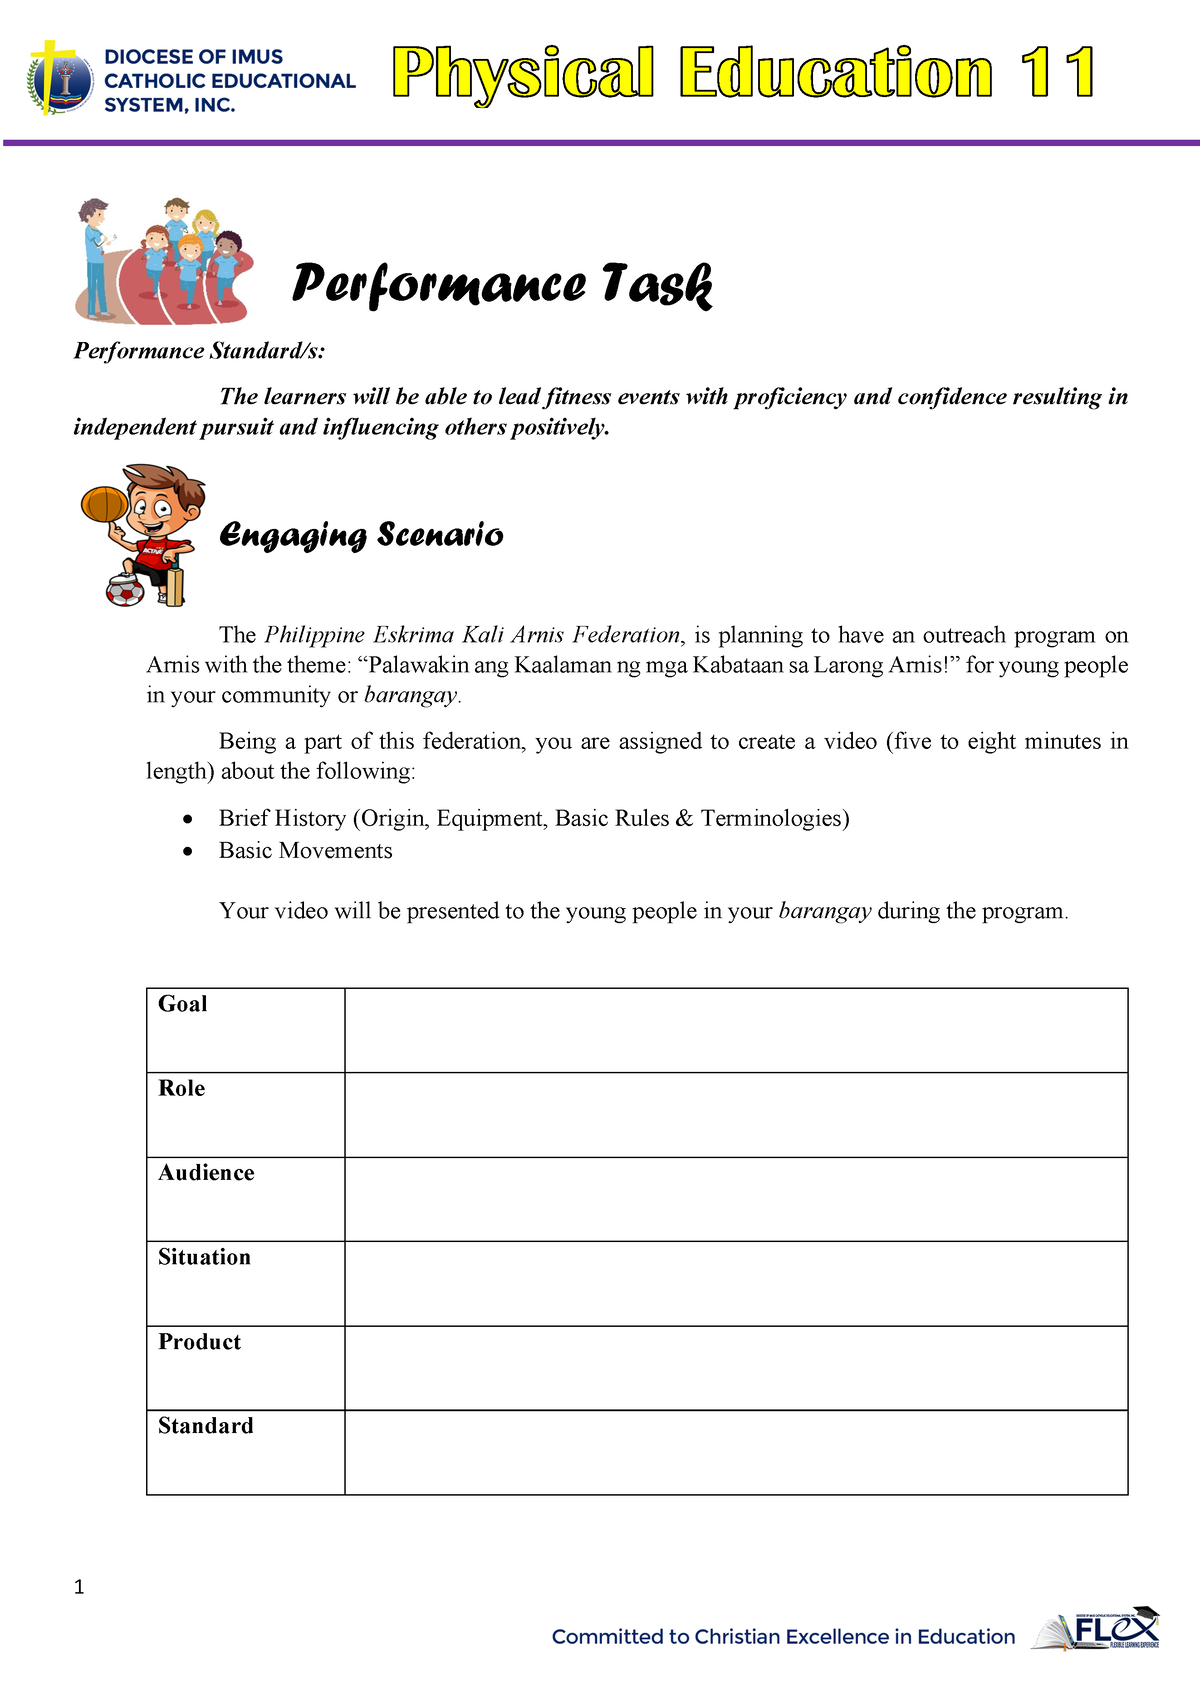 performance task physical education